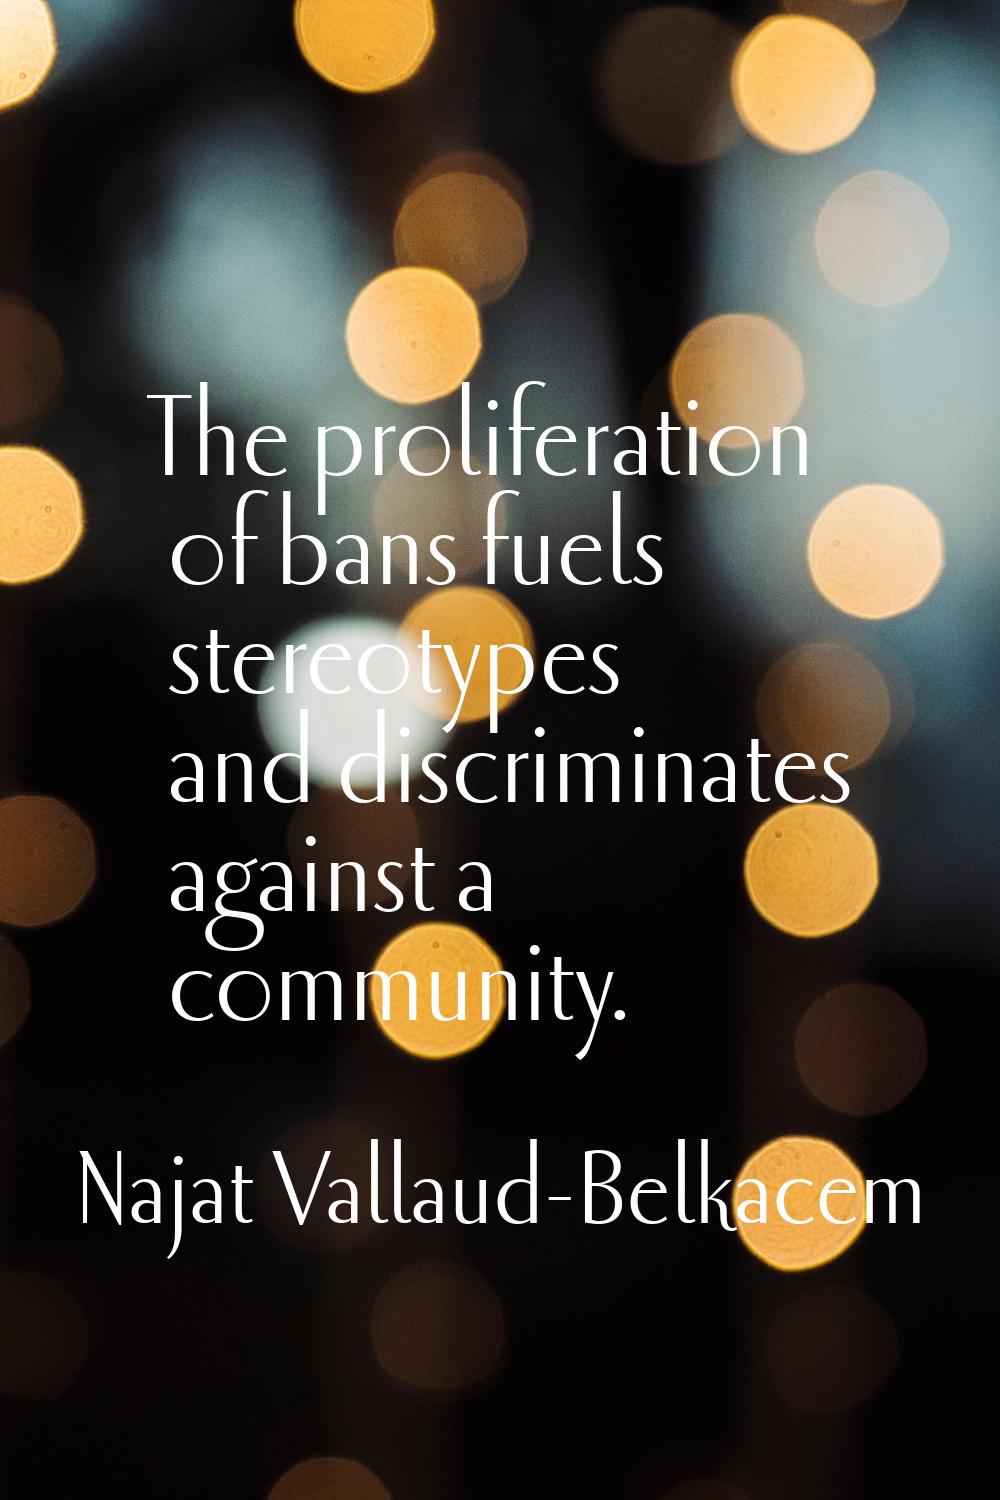 The proliferation of bans fuels stereotypes and discriminates against a community.